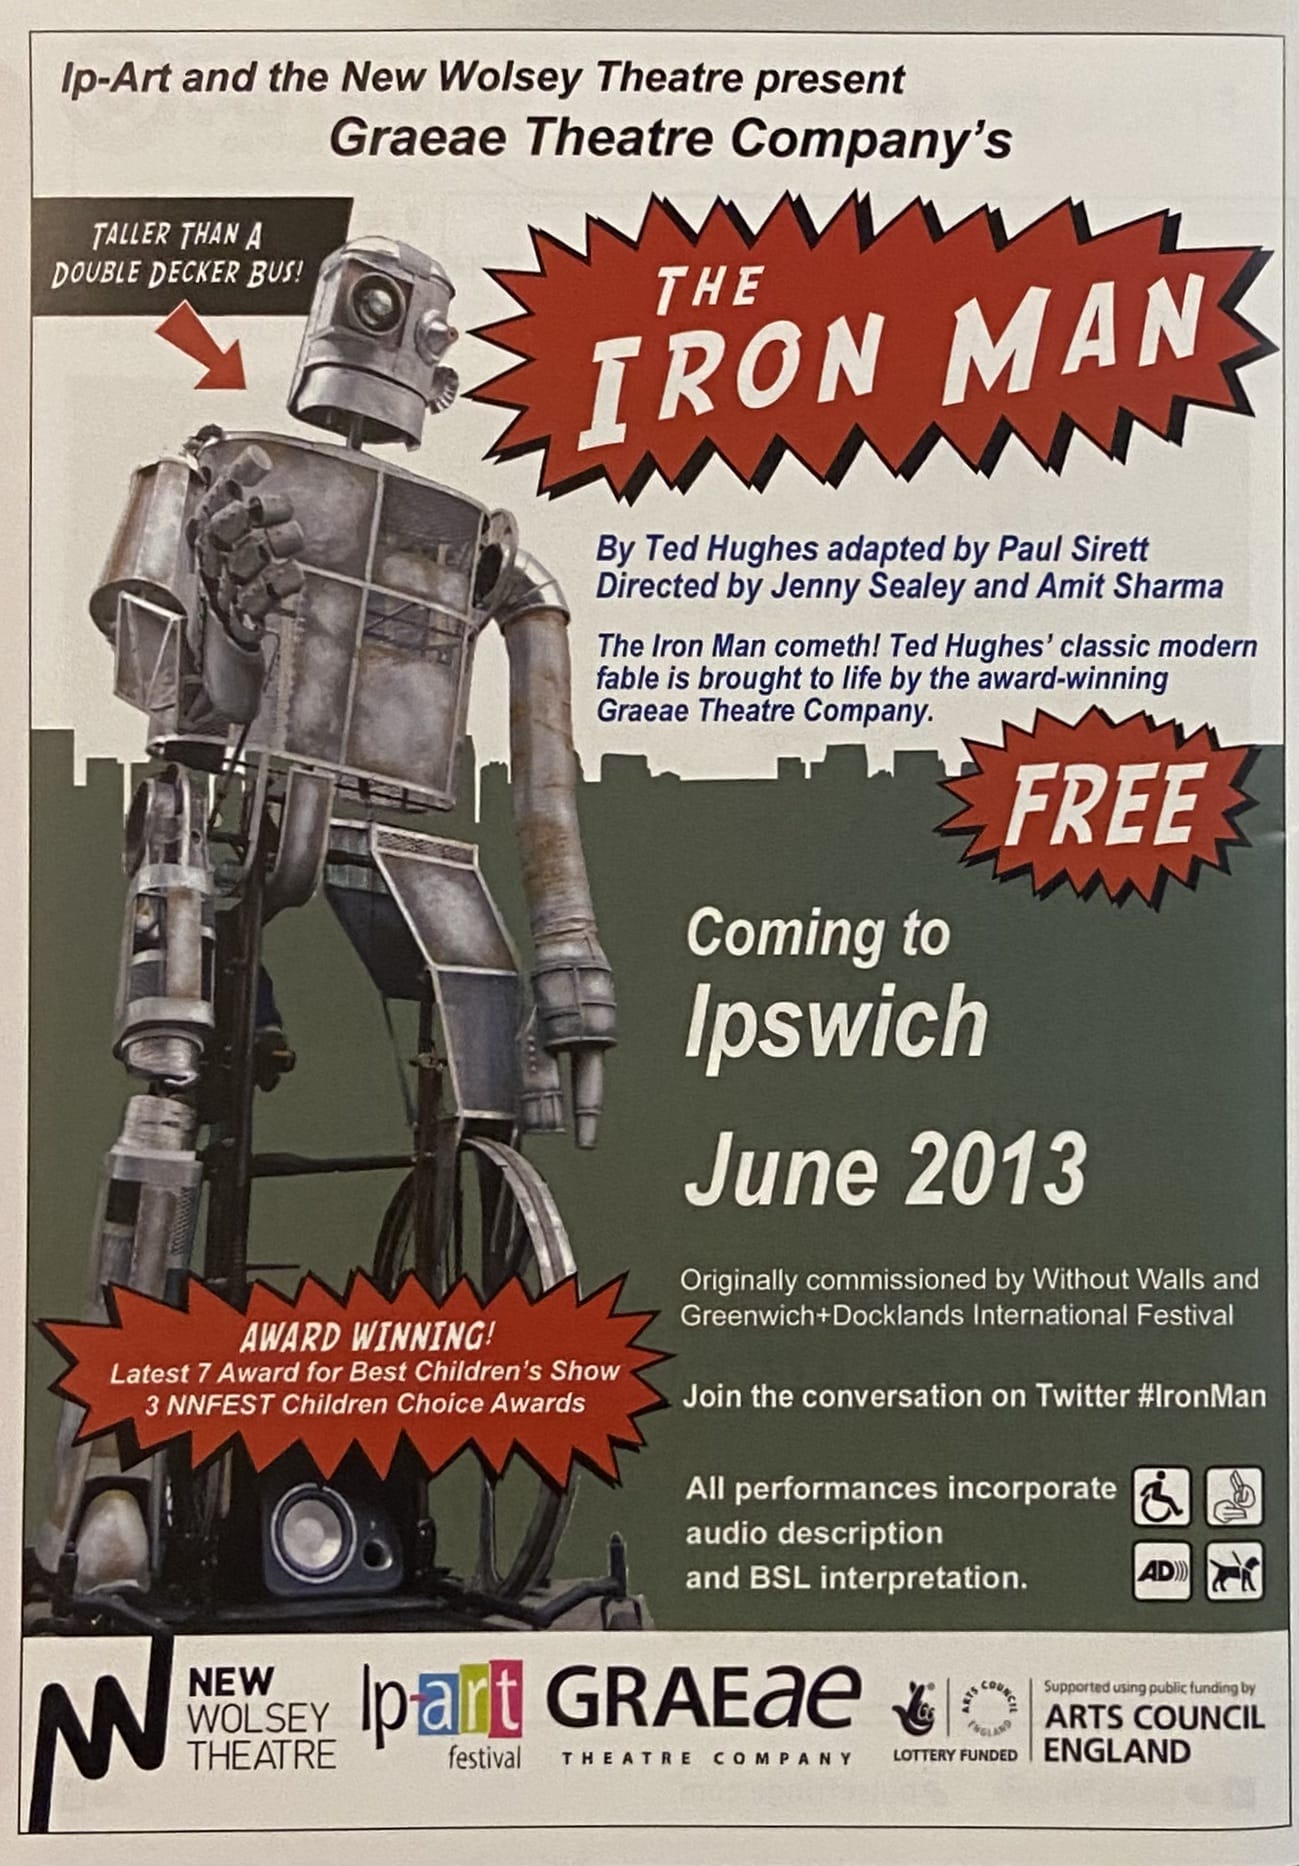 A poster for Graeae's 'The Iron Man'. Its grey and white, with white text in red speech bubbles advertising the event. There is a picture of the iron giant labelled 